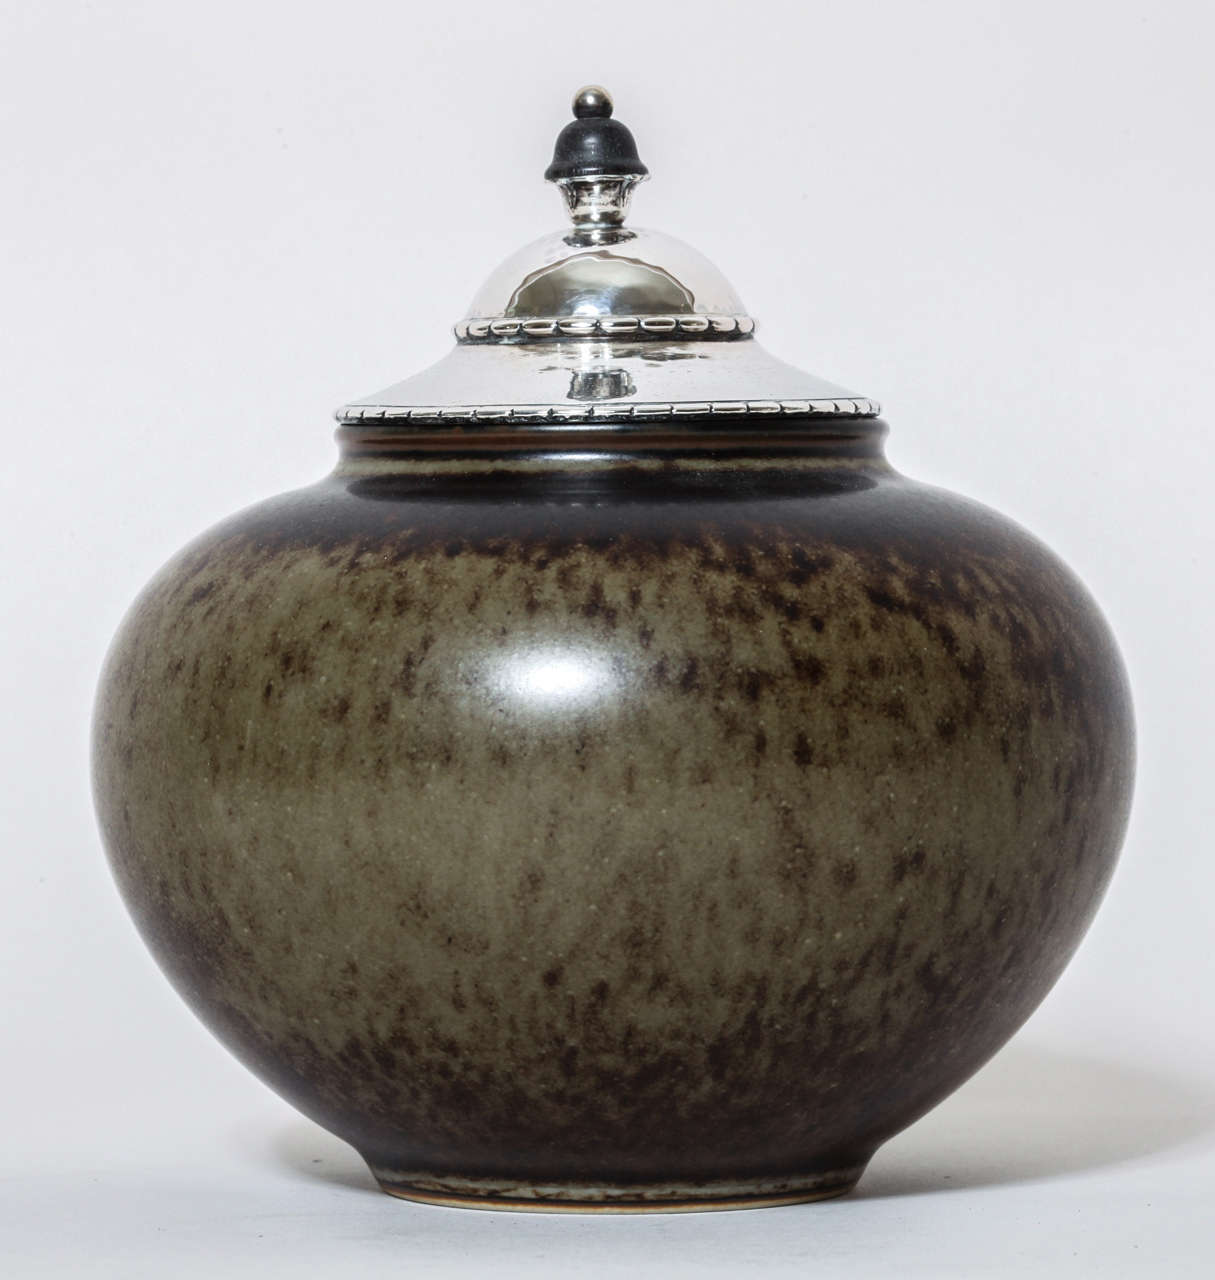 This covered pot has an mottled ochre brown glaze with a beautiful silver top with ebony finial.
Pot is signed with printed factory marks HHH & 20517.
Lid with Denmark sterling silver stamp for 1920/ Assay Master C. F. Heise monogram/ D and A with